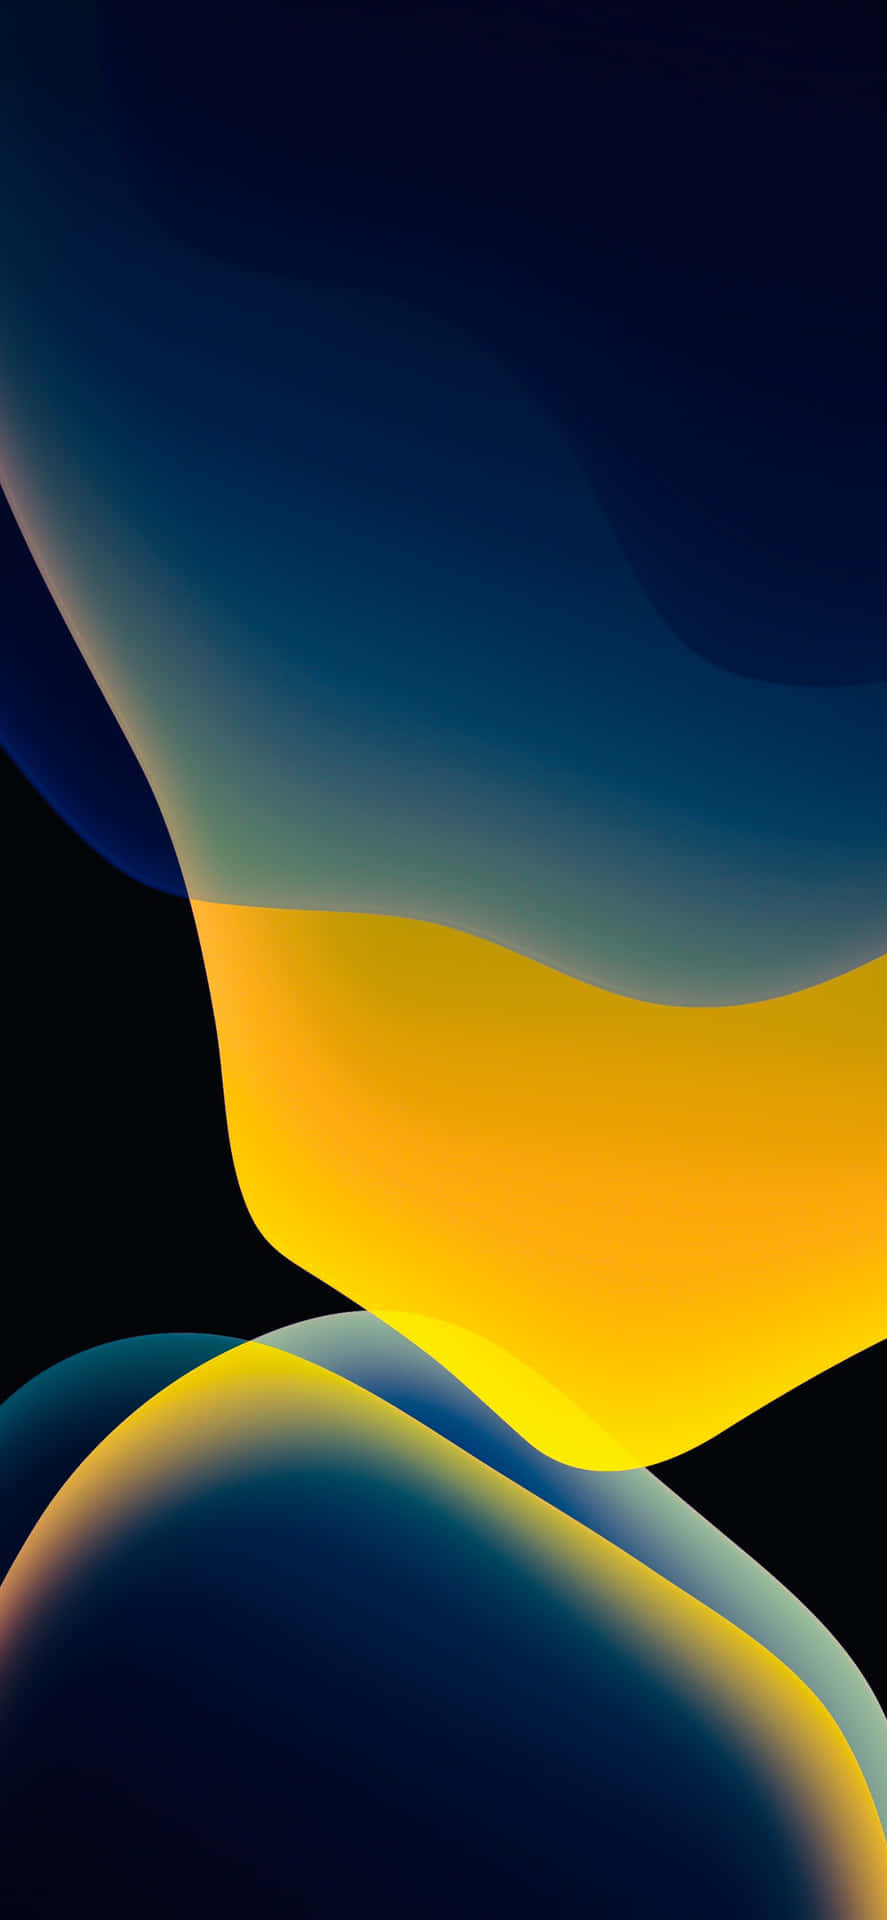 IPhones XS Max Abstract Blue And Gold Glow Wallpaper